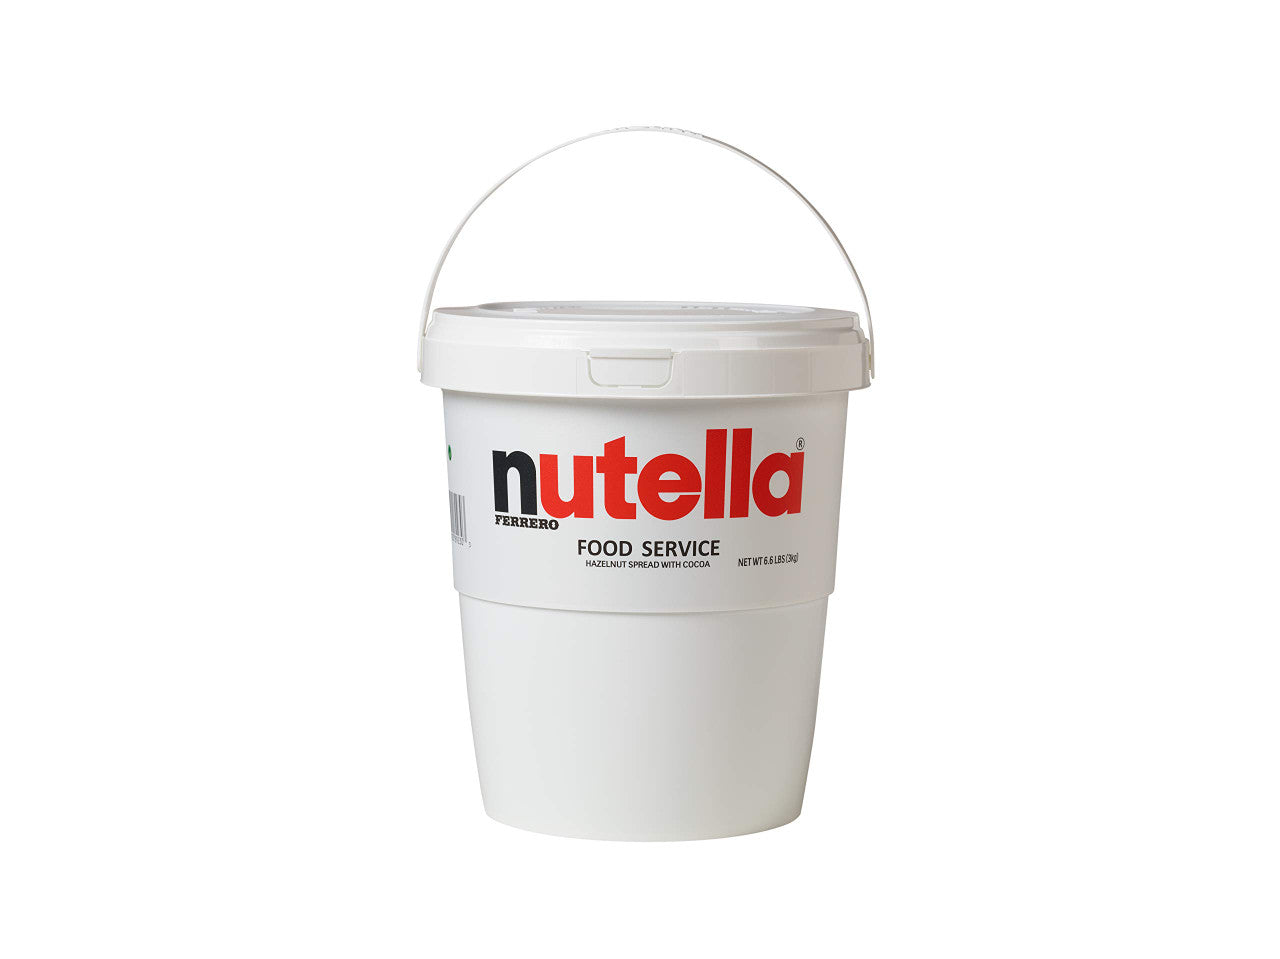 Nutella Chocolate Hazelnut Spread, Bulk Size for Food Service (3kg) 6.6 lb Tubs, 2pk {Imported from Canada}